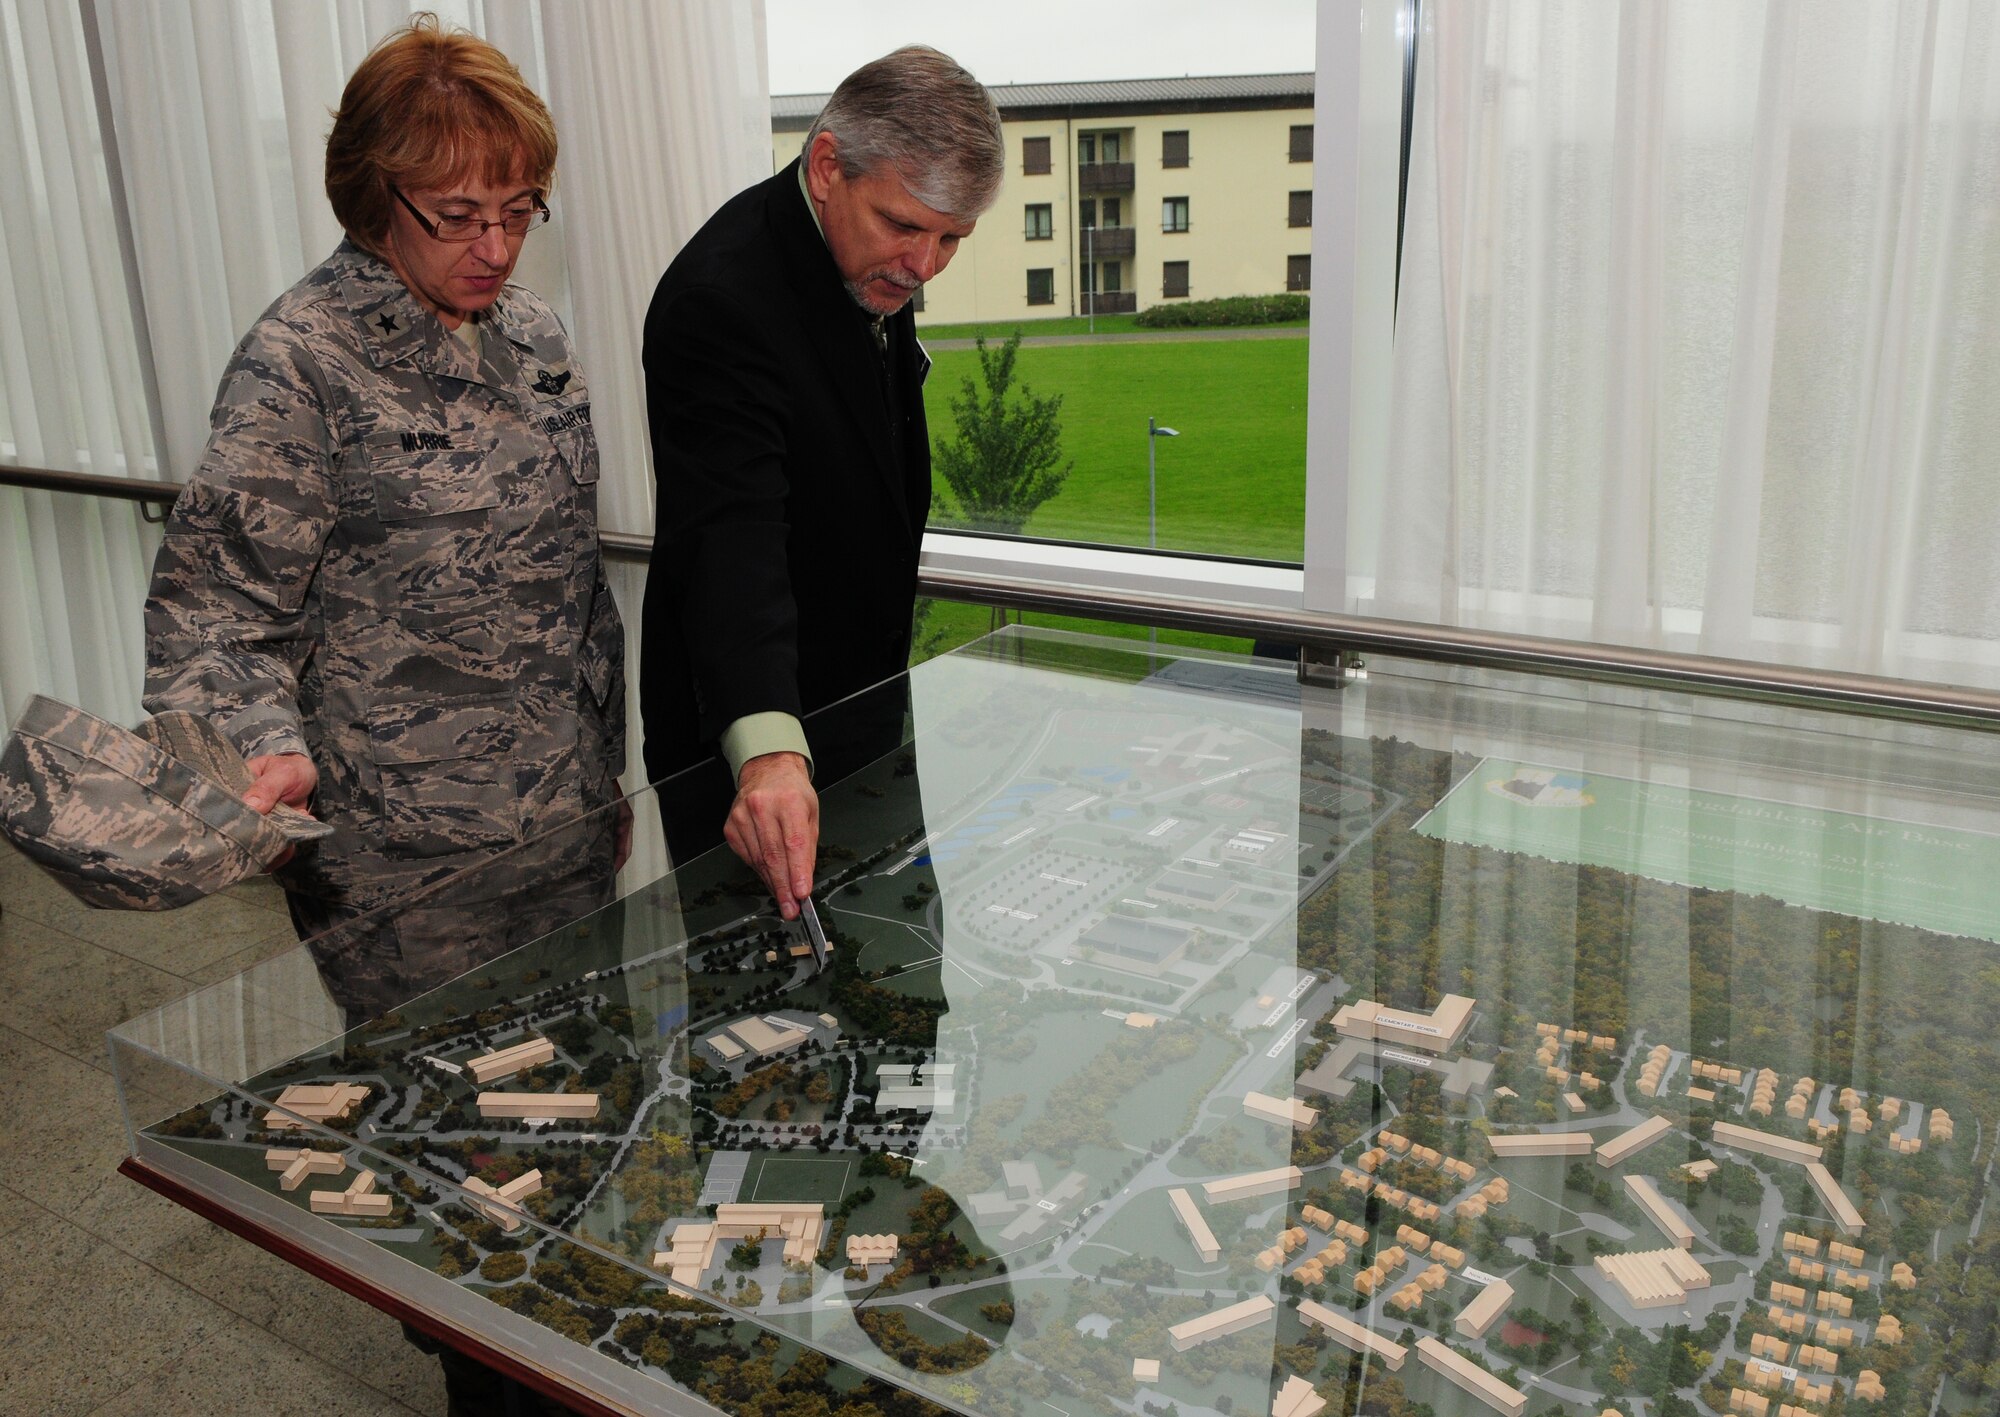 SPANGDAHLEM AIR BASE, Germany – Michael McGuire, 52nd Force Support Squadron Eifel Arms Inn general manager, shows Brig. Gen. Eden Murrie, director of Air Force Services, a model of the planned base expansion during her visit here Sept. 9. General Murrie visited various facilities and flights within the 52nd Force Support Squadron to familiarize herself with how the 52nd Fighter Wing takes care of its Airmen and their families. (U.S. Air Force photo/Airman 1st Class Matthew B. Fredericks)